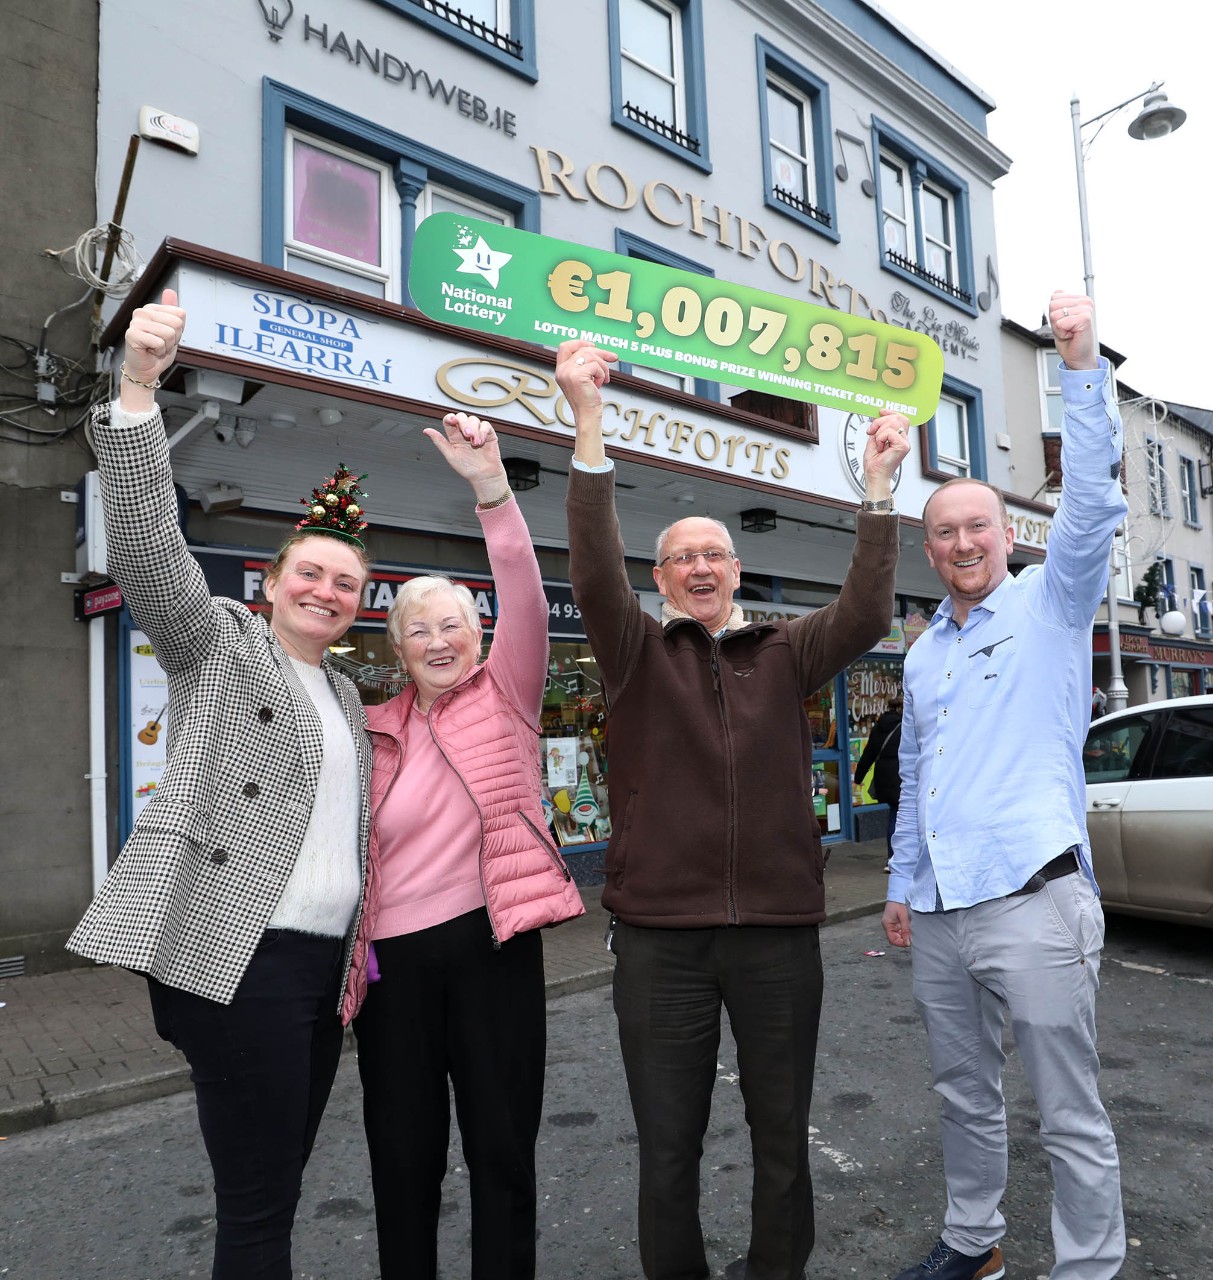 NO REPOR FEE: 20TH December 2021. Rochforts Superstore a family owned business in Mullingar, Co. Westmeath were celebrating after it was announced that their Westmeath store sold the winning Lotto Match 5 + Bonus ticket worth â ¬1,007,815 in Saturday nightâ  s draw. Pictured here in jubilant form outside their shop were Avril Kelly, Sheila Nally, Tom Nally snr and ThomÃ¡s Nally. Pic: Mac Innes Photography